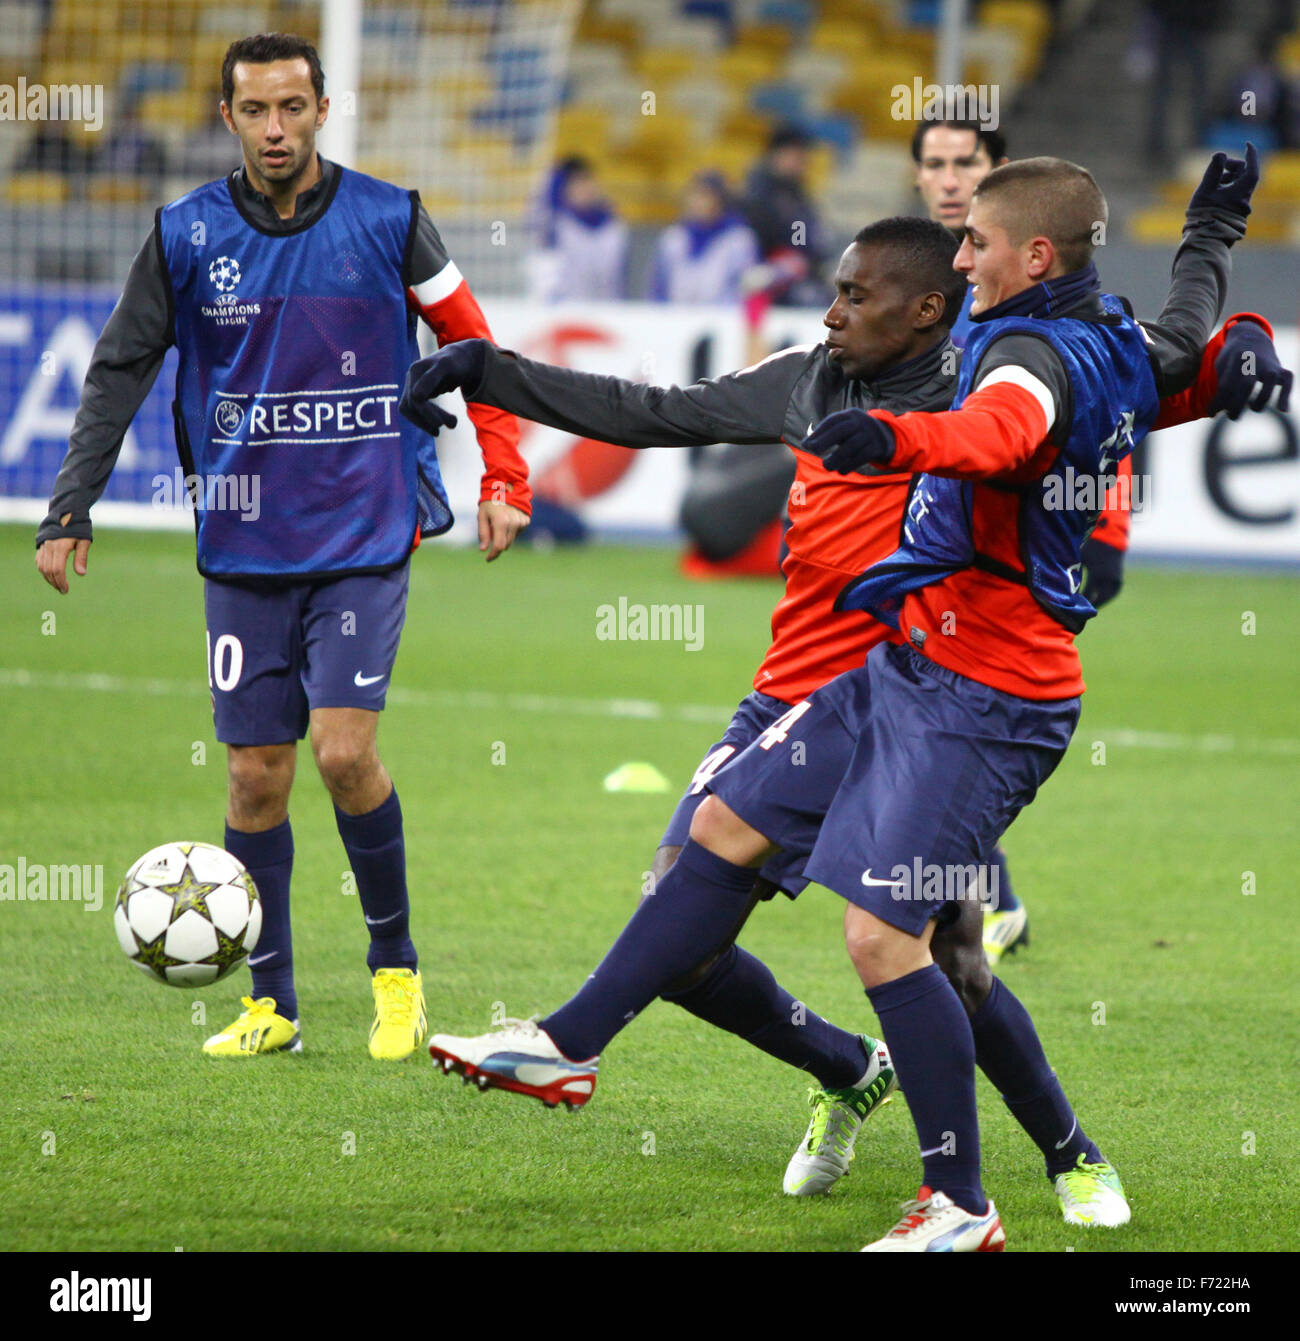 KYIV, UKRAINE - NOVEMBER 21, 2012: FC Paris Saint-Germain players fight for the ball during training session before UEFA Champions League game against FC Dynamo Kyiv on November 21, 2012 in Kyiv, Ukraine Stock Photo